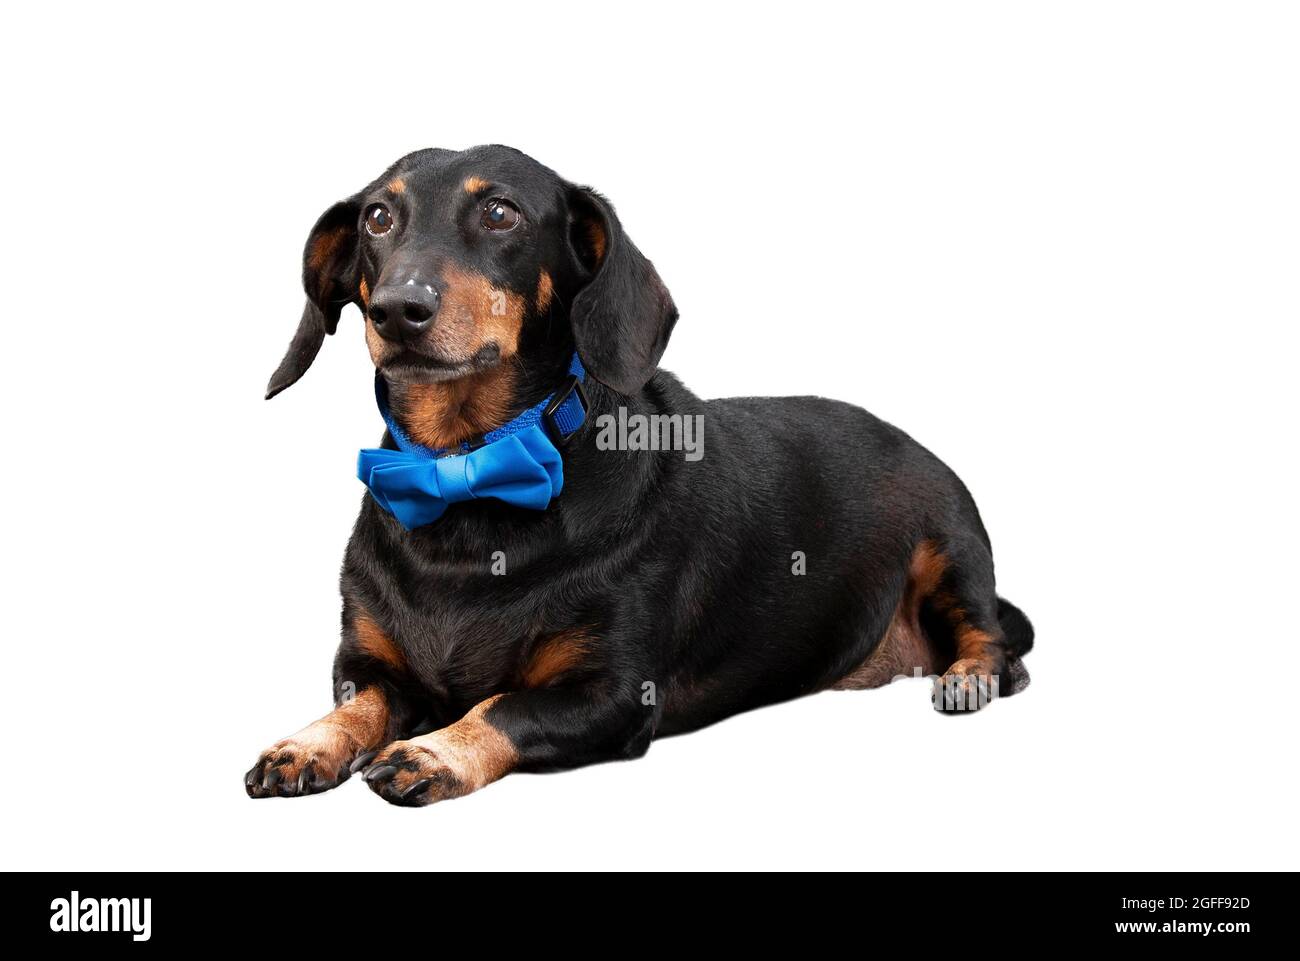 Horizontal shot of a black and red dachshund wearing a blue bow tie isolated on white with copyspace. Stock Photo